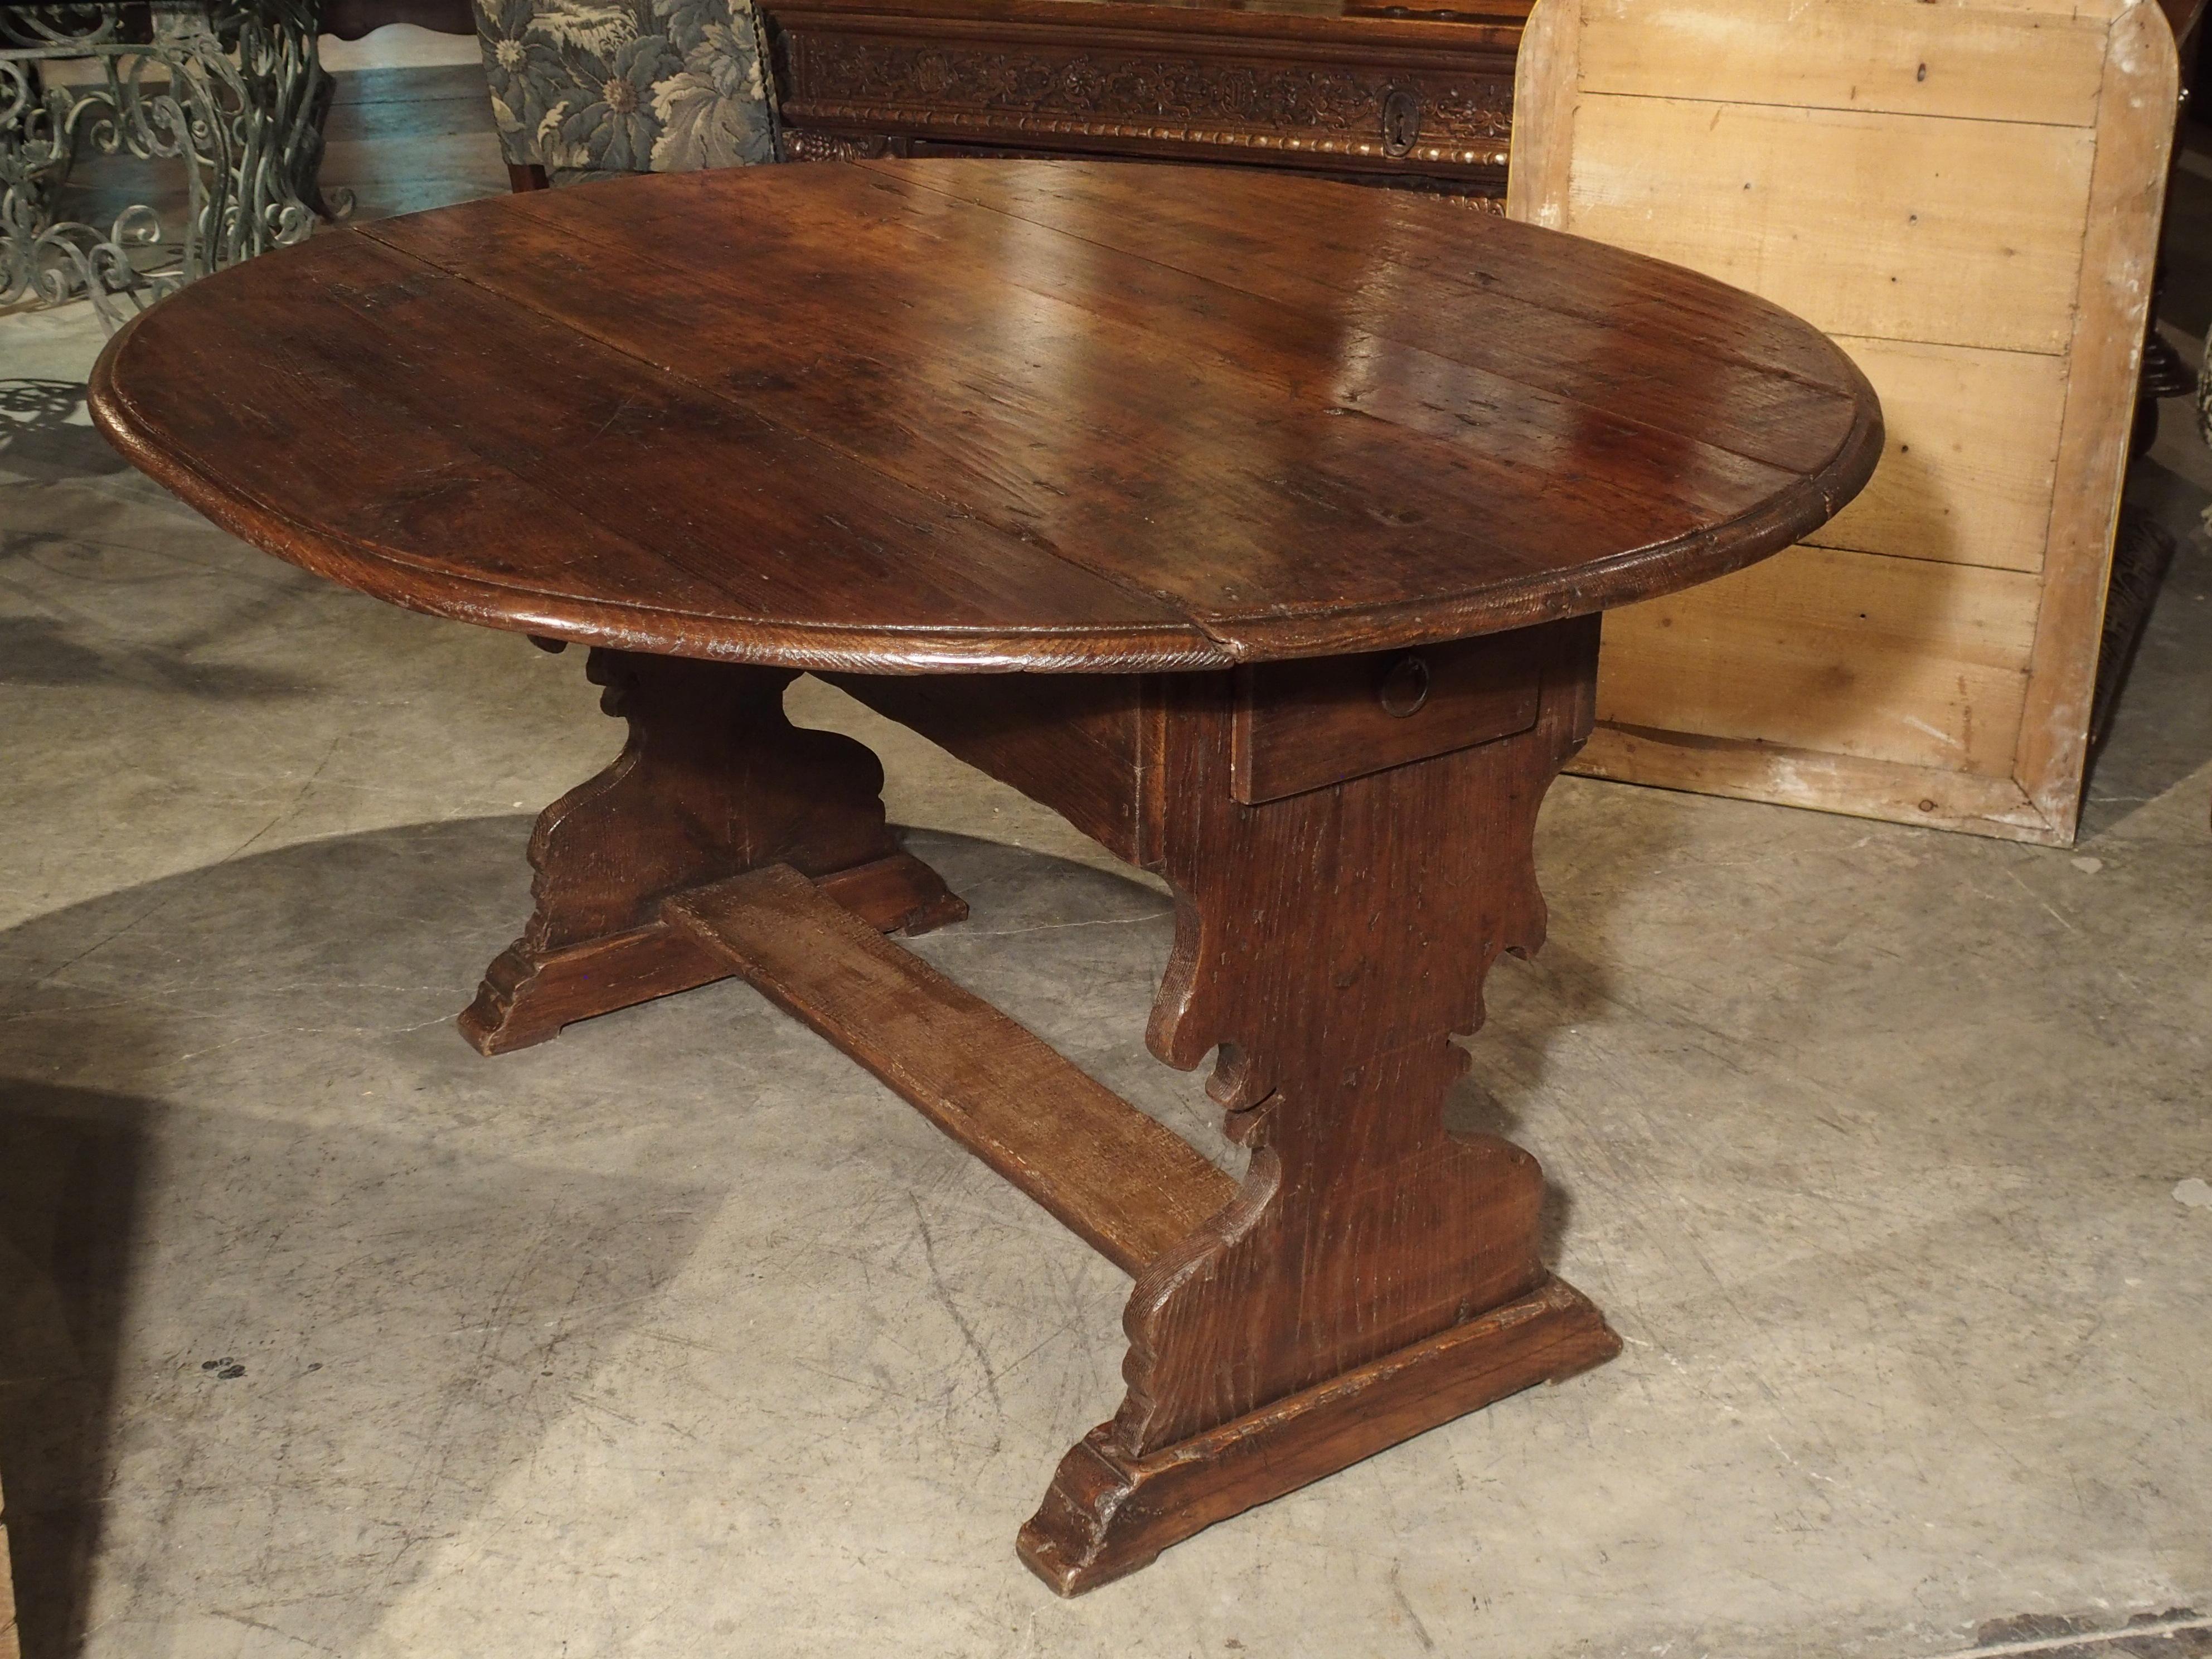 This antique chestnut wood, drop leaf table is from Italy, circa 1780. It has two drop leaves on either side of the center plank. The plank has an apron with deep drawers on either end, and the apron has shaped wooden holders to support the leaves.